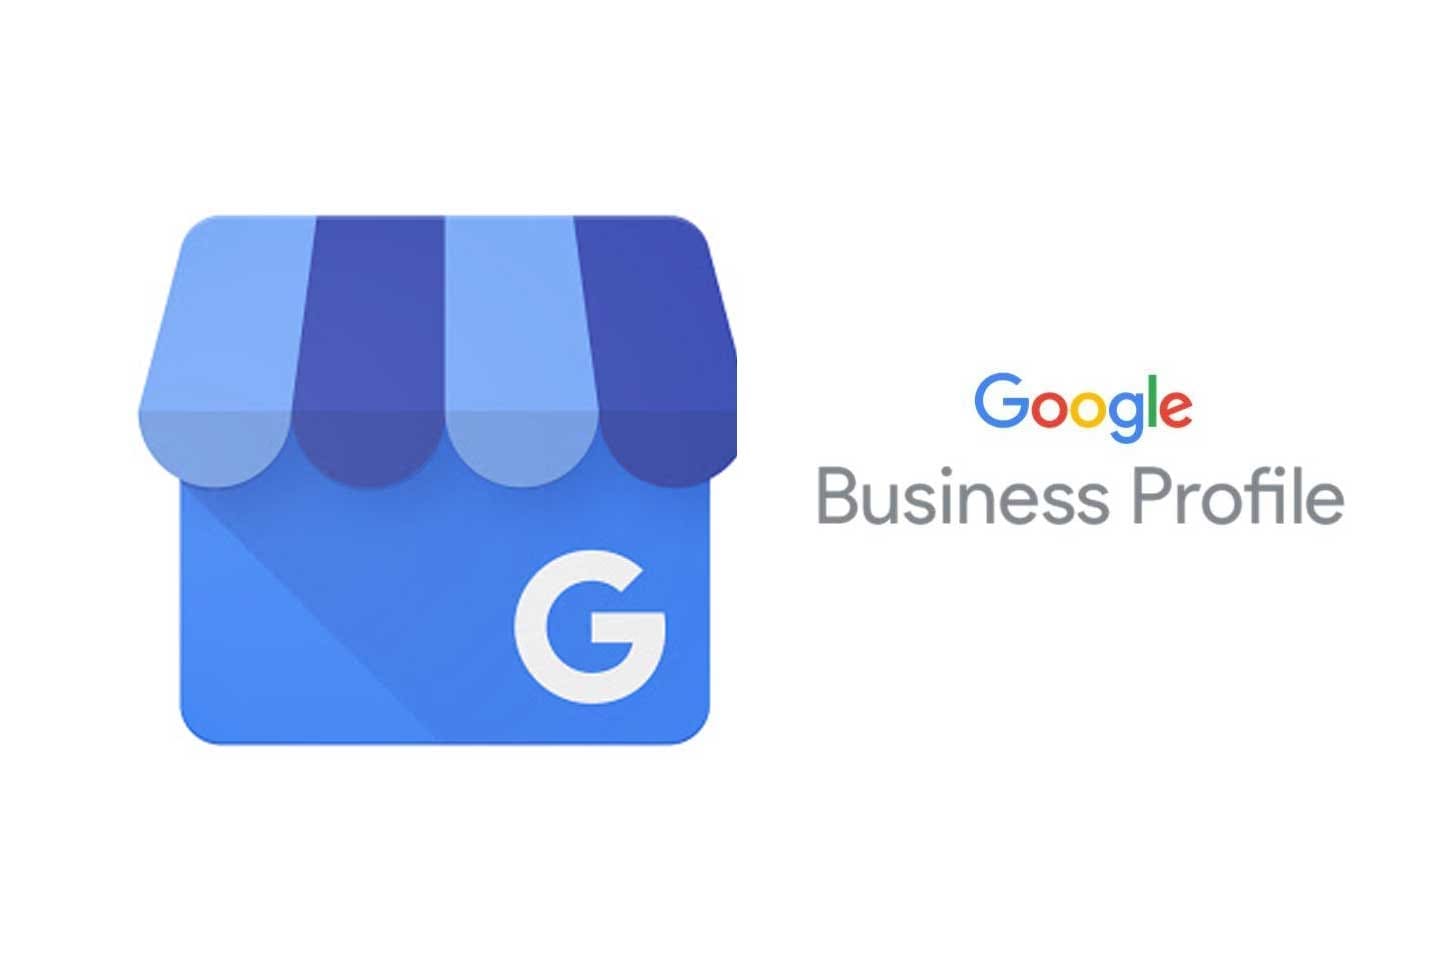 Is Google Business Profile worth it?